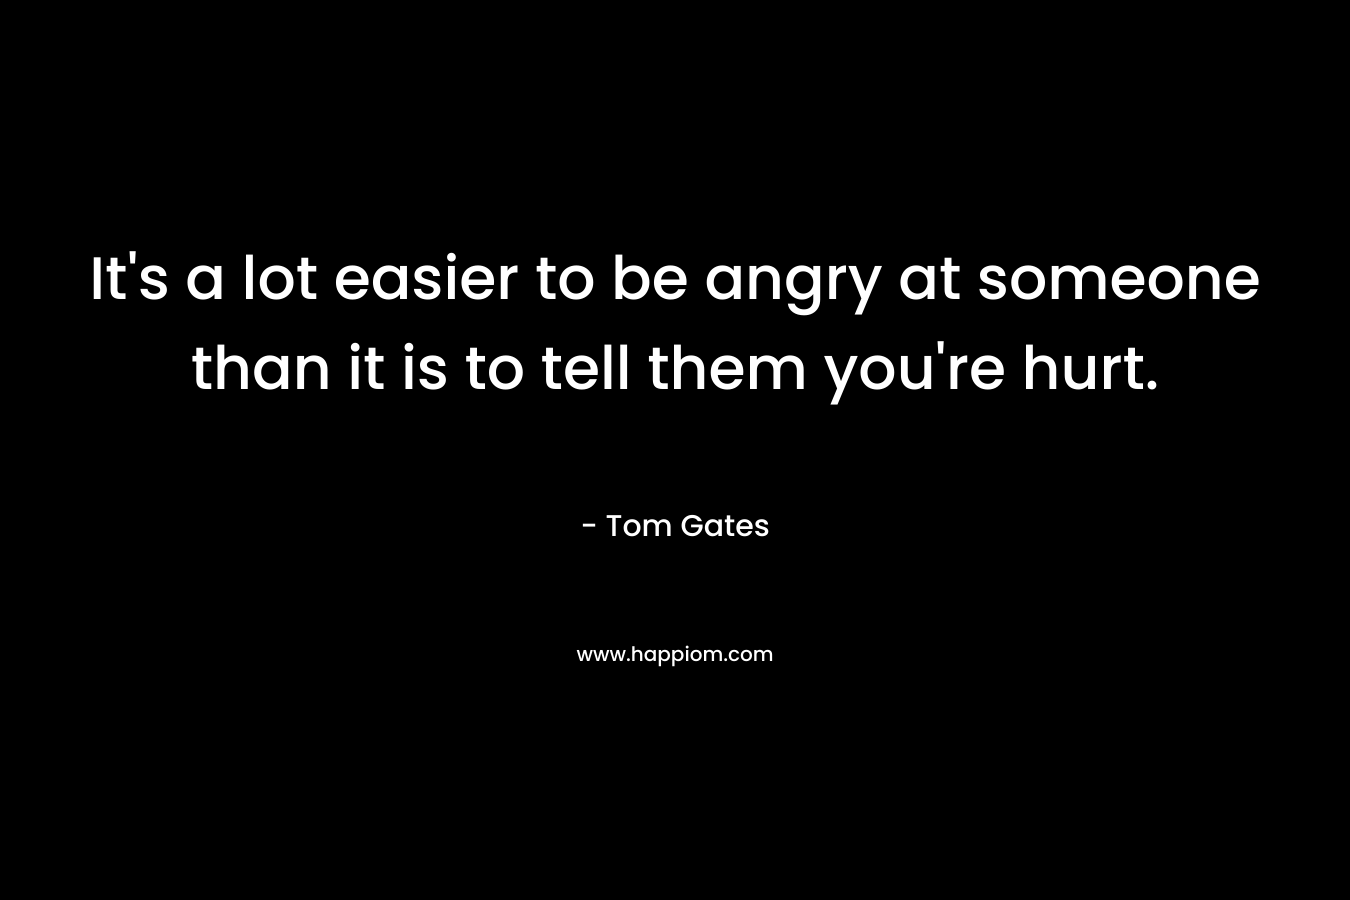 It's a lot easier to be angry at someone than it is to tell them you're hurt.